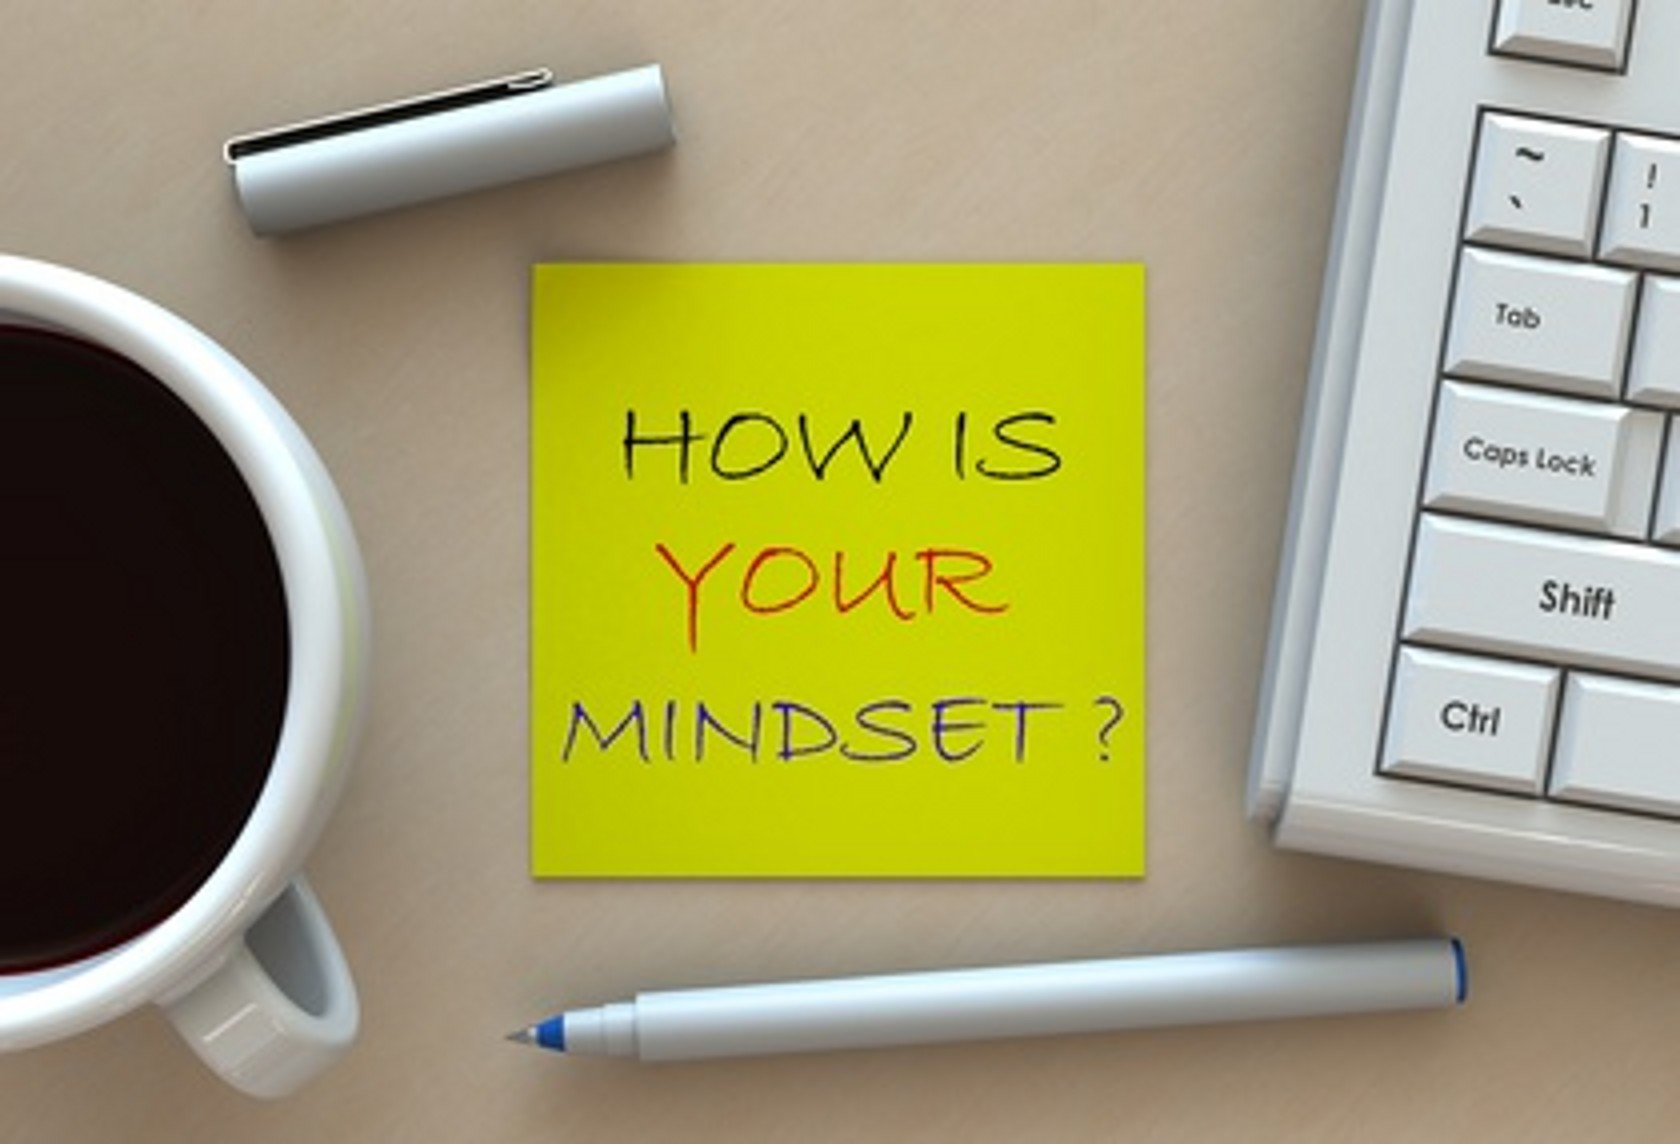 How is your mindset